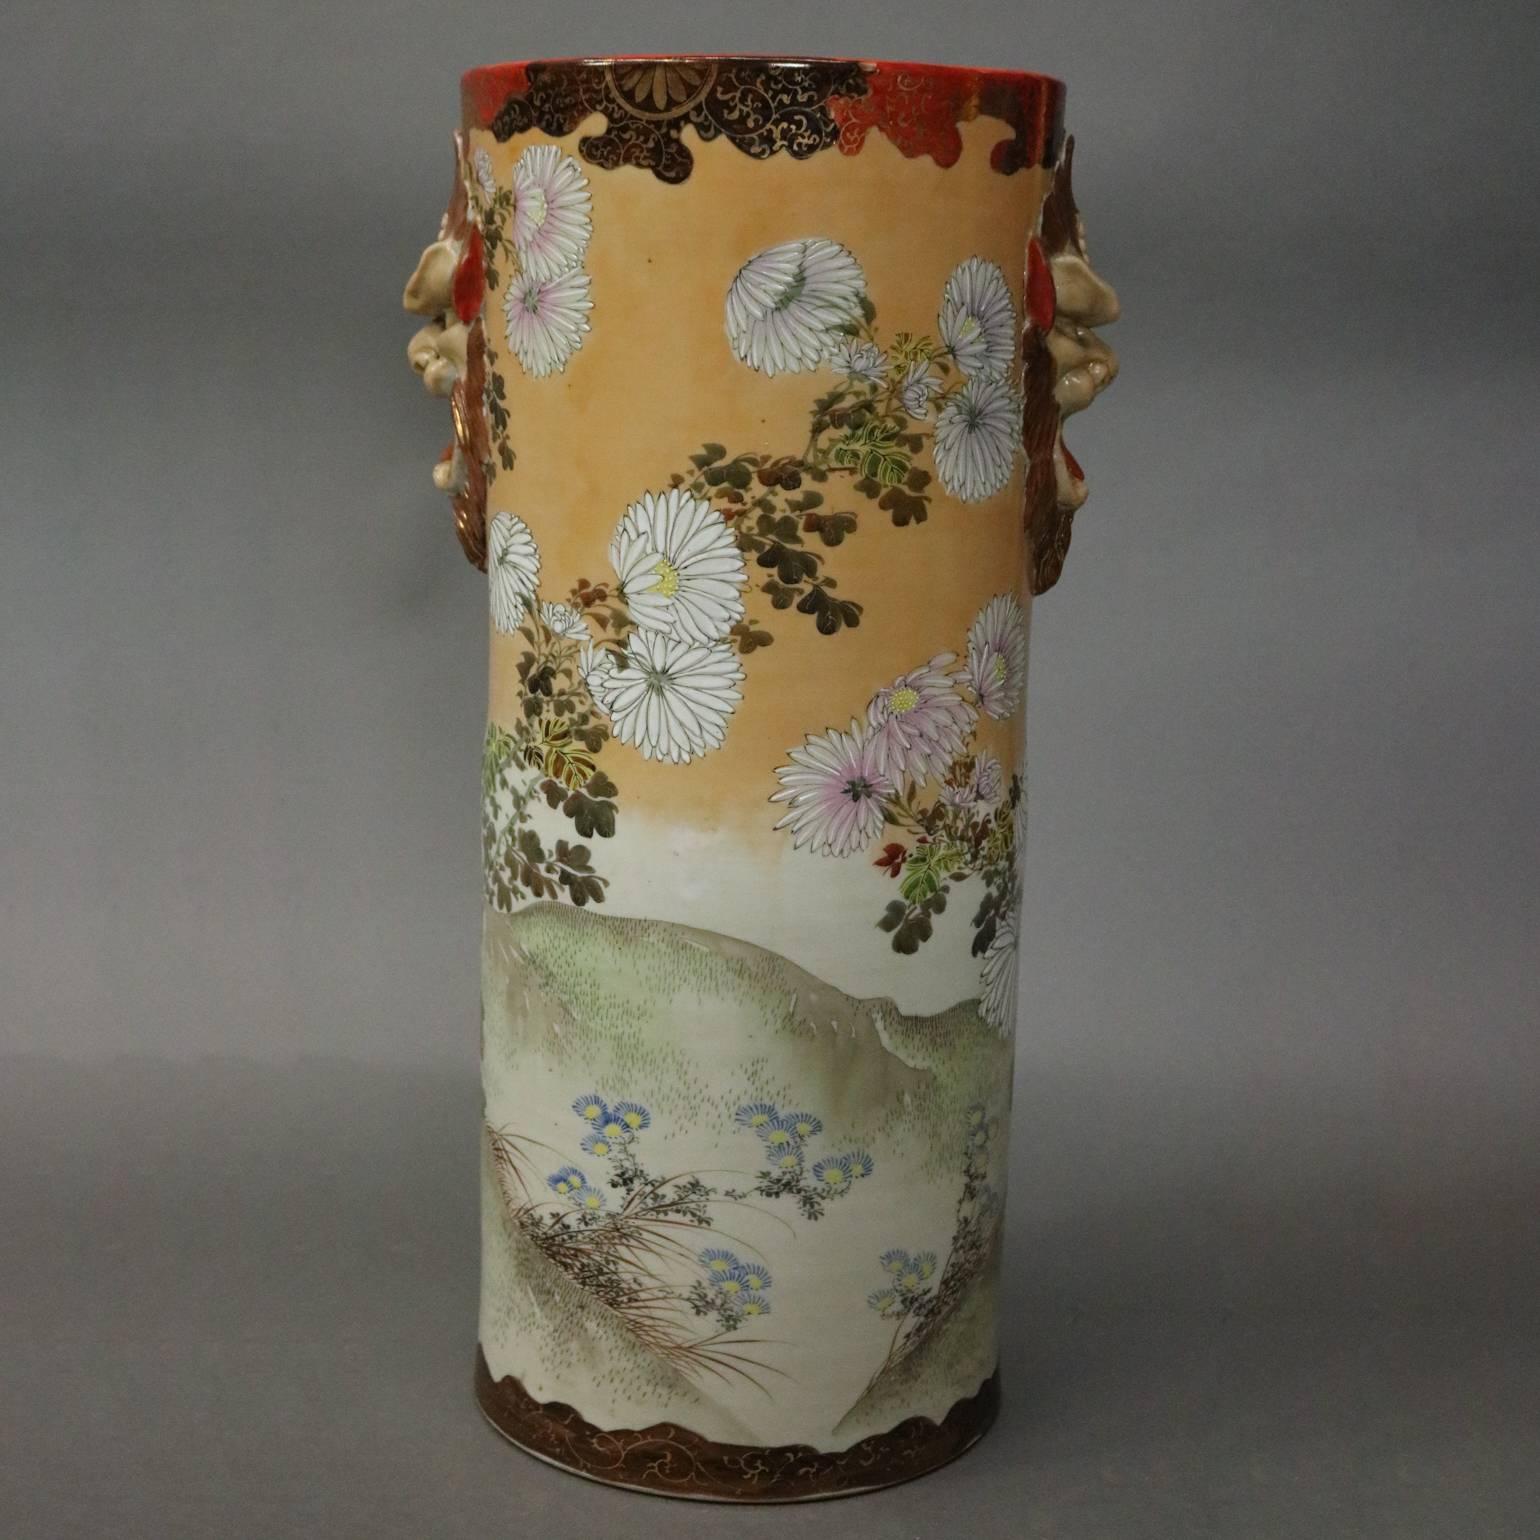 Antique Japanese Satsuma porcelain umbrella stand features floral scene with birds and has applied figural Oni (Japanese devil figure) handles, circa 1880

Measures - 24" H x 12" diameter

FYI.....Oni (?) are a kind of yokai from